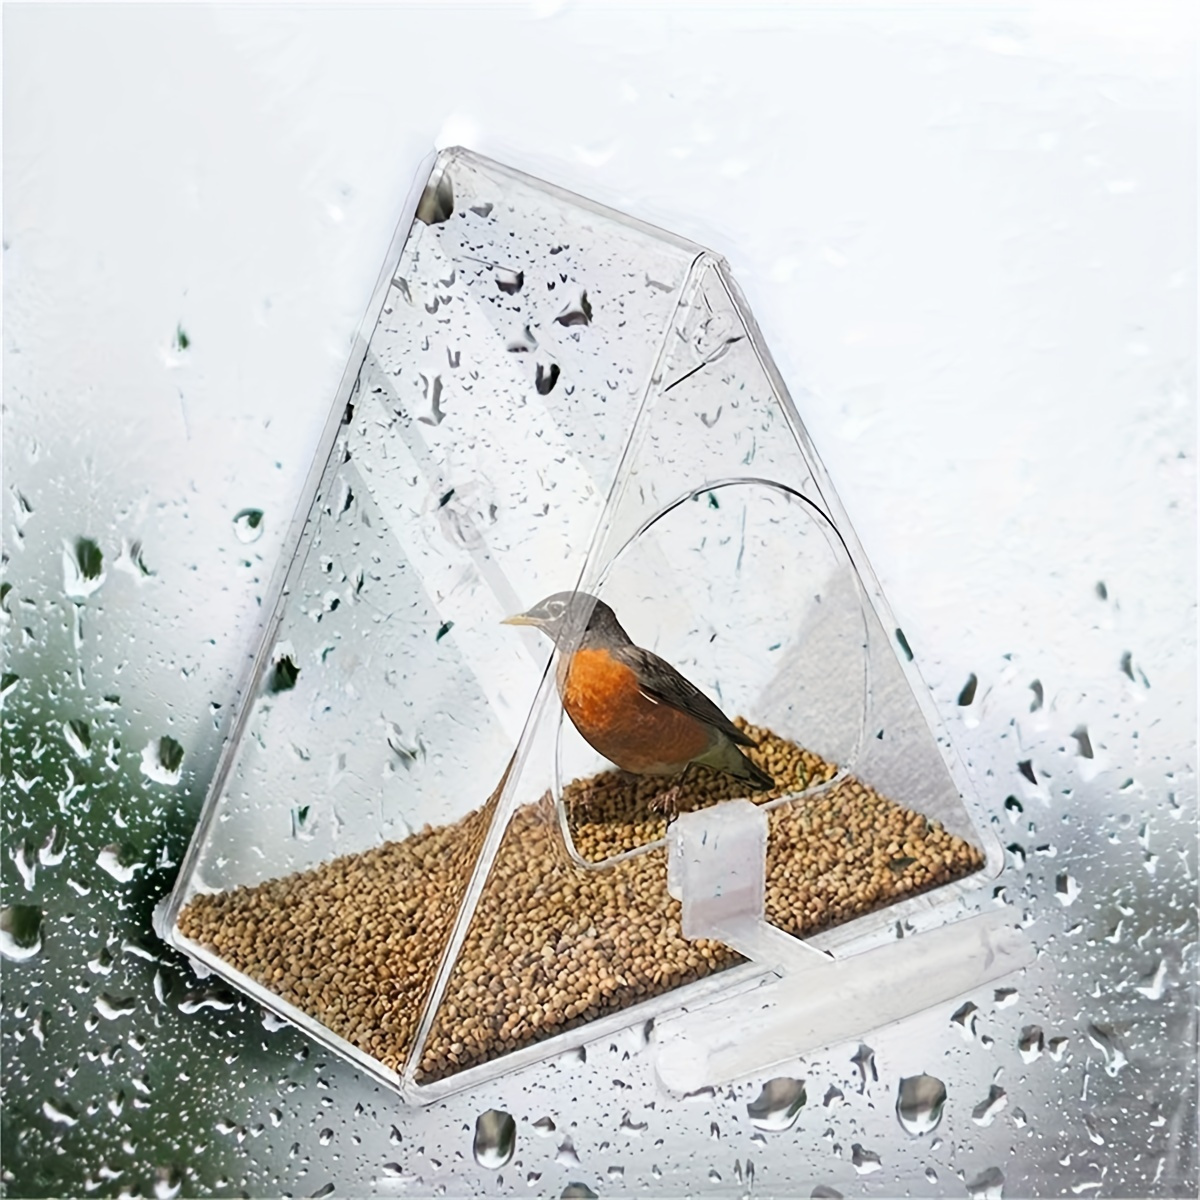 

Acrylic Window Bird Feeder With Strong Suction Cup For Outdoor Garden And Yard - Clear Transparent Design For Bird Watching - Durable Pmma Material - Ideal For Species